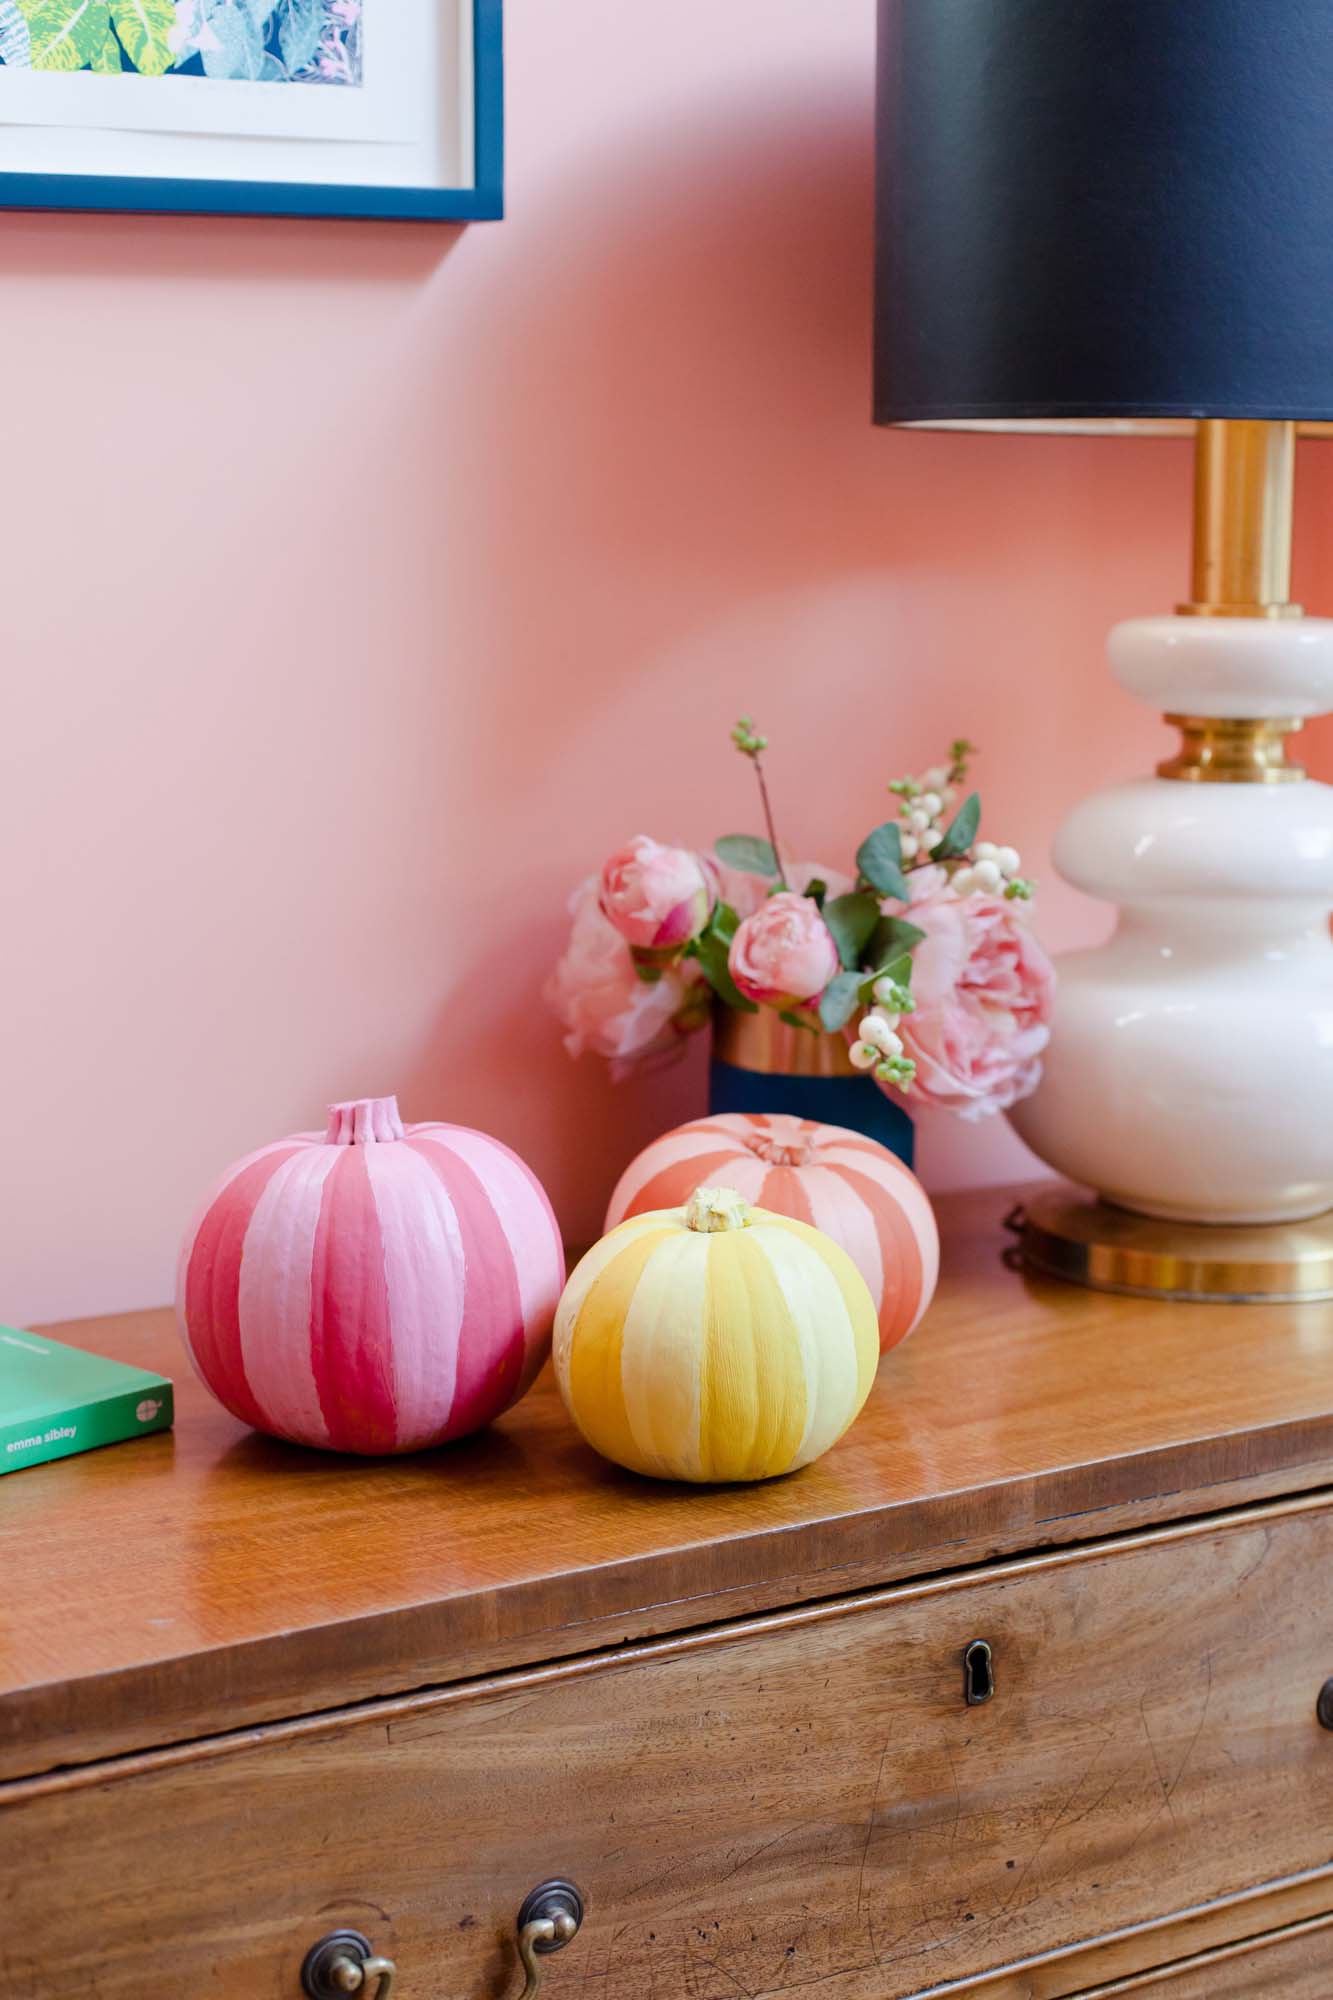 Stripy painted pumpkins in pink, orange and yellow